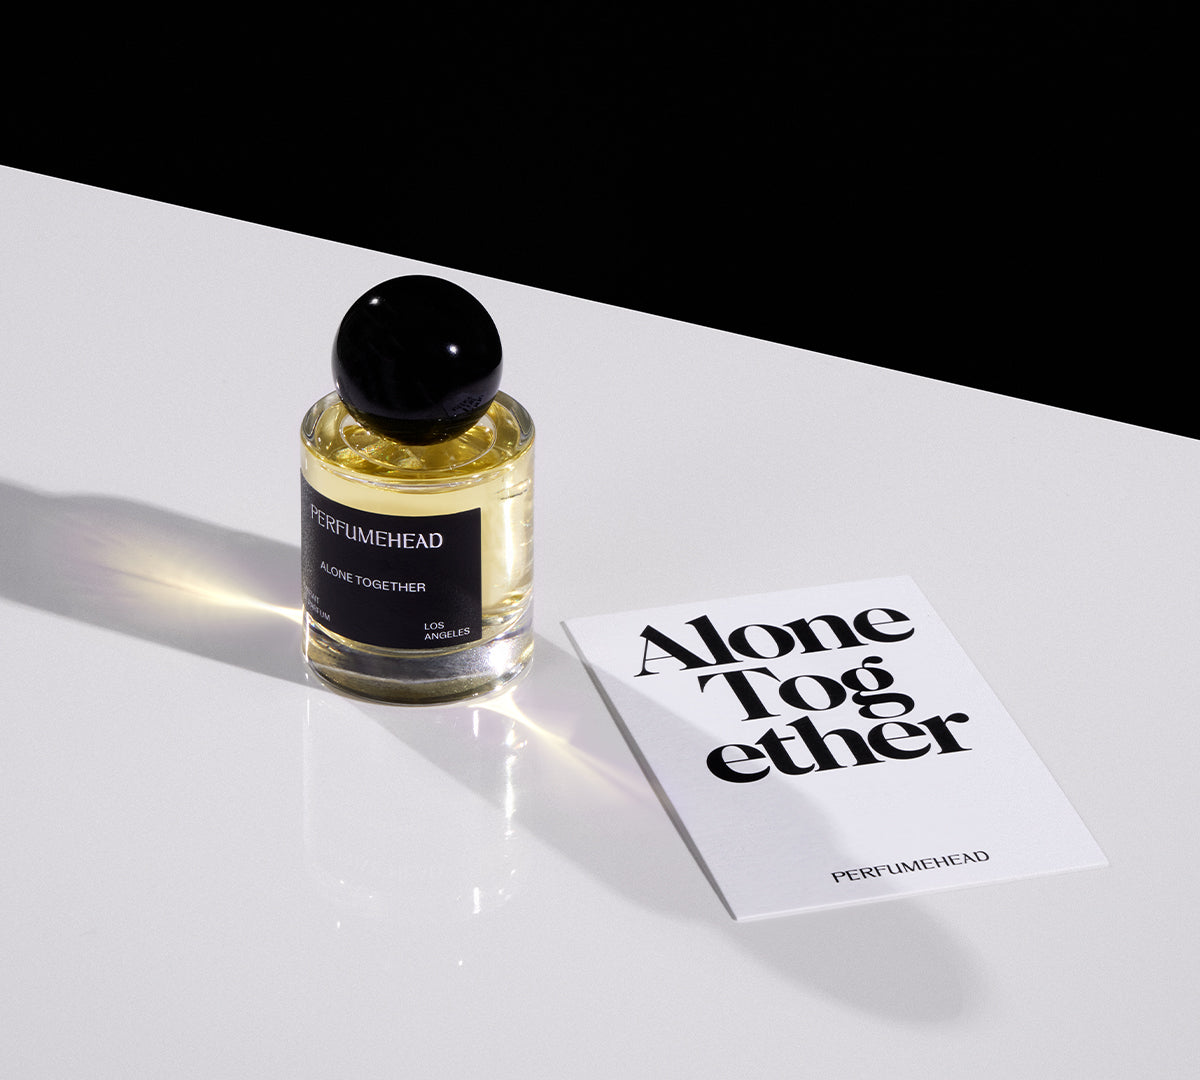 Alone Together extrait de parfum 50ml signature spray bottle and typography